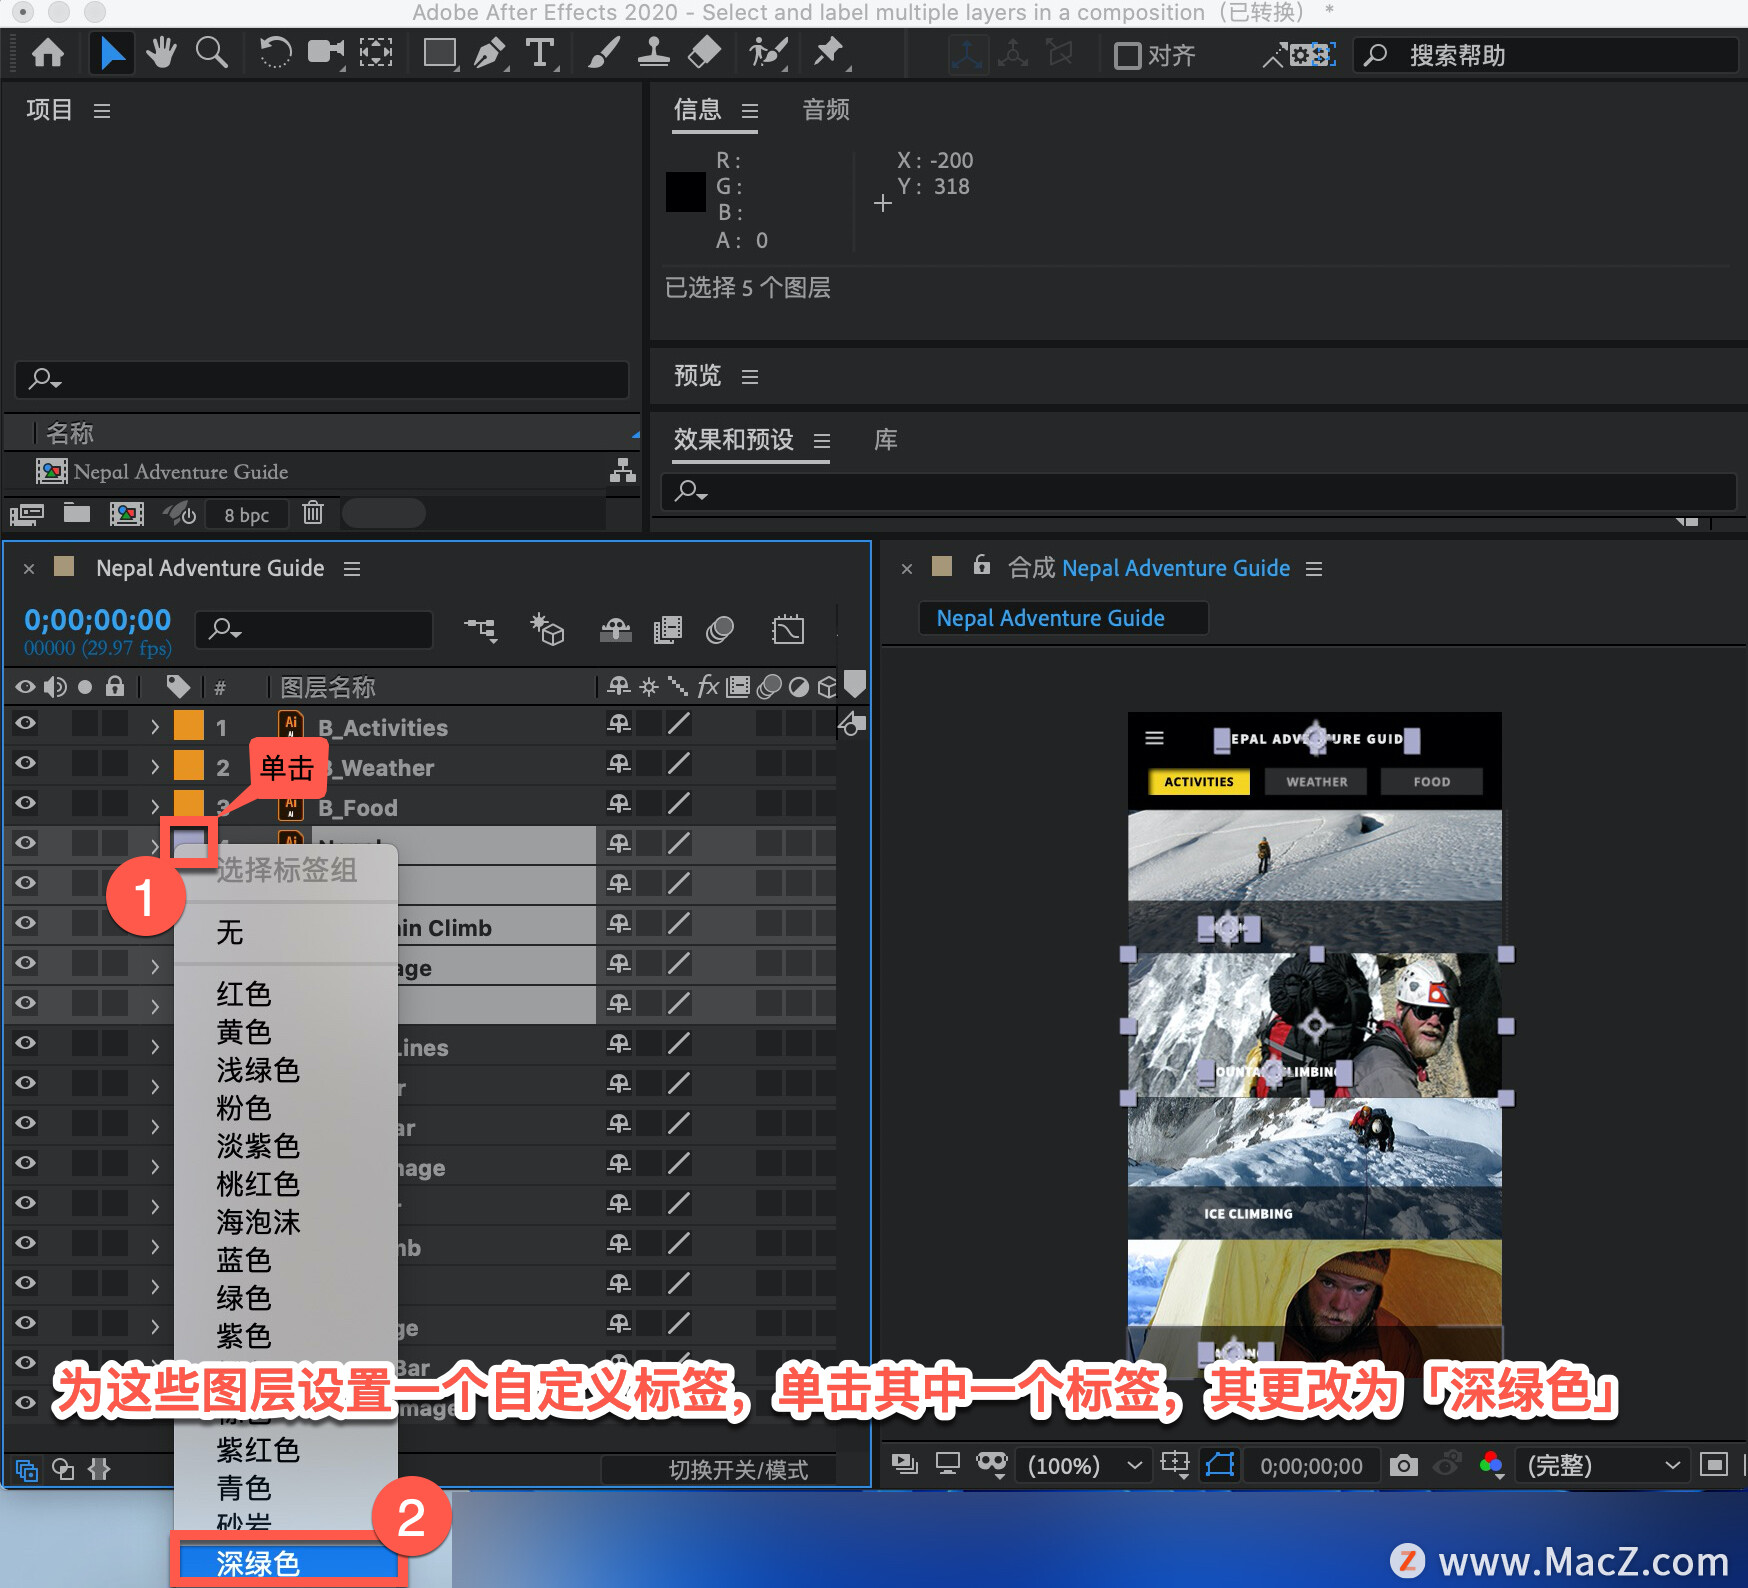 After Effects 教程「46」，如何在 After Effects 中更改多个图层的标签颜色？